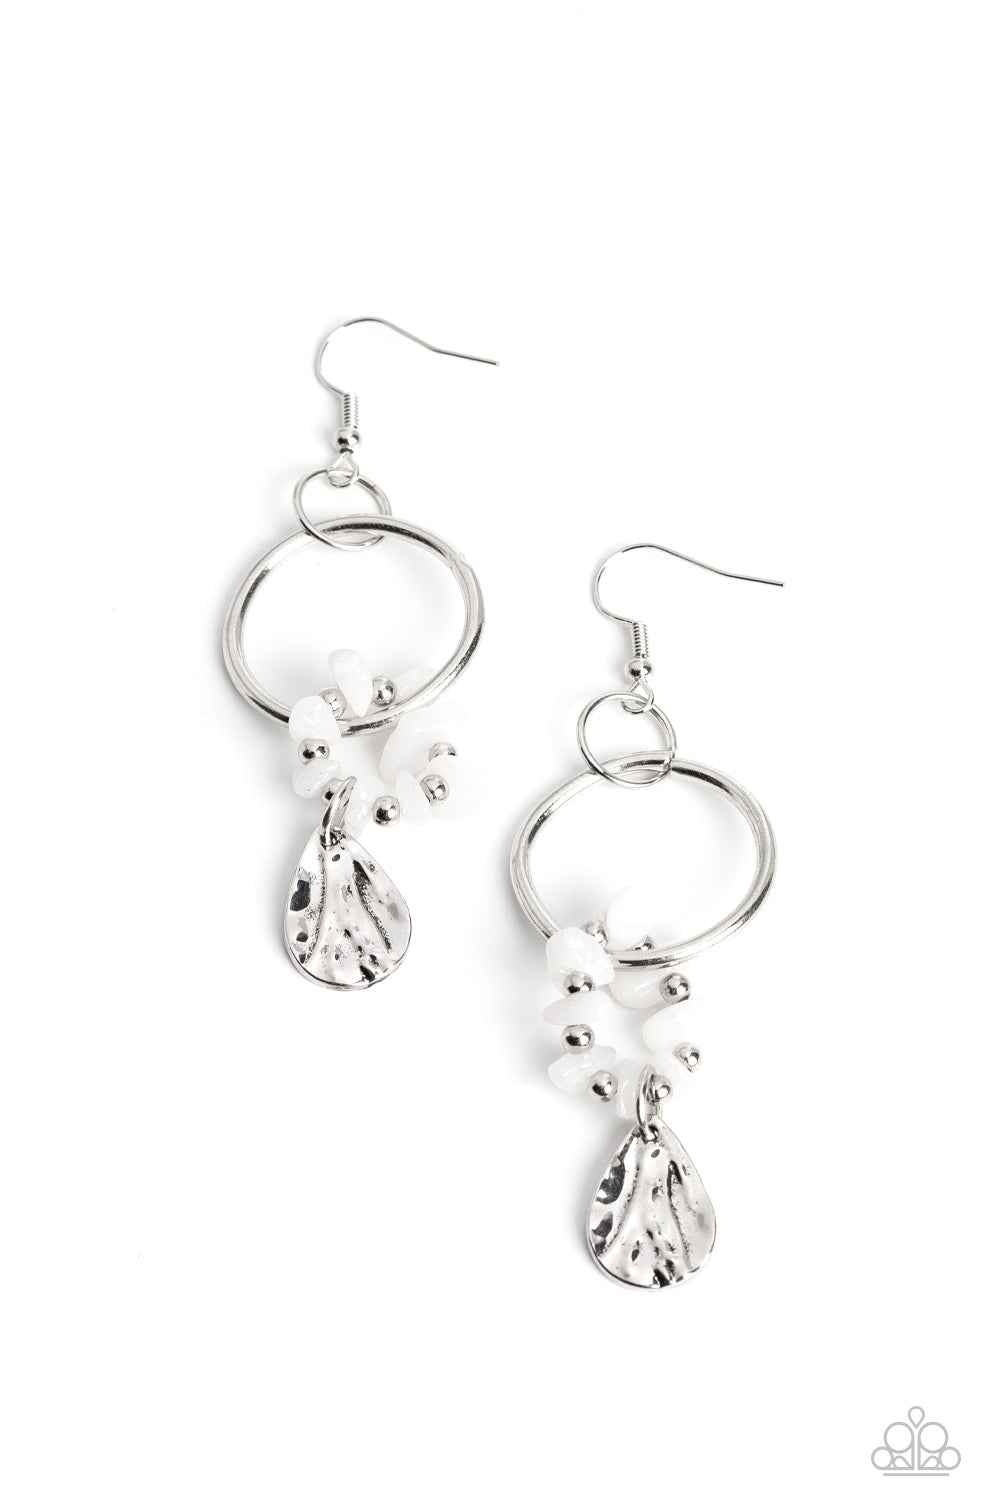 Fossil Flair - White Stones, Silver Hammered Teardrop, & Silver Loop Paparazzi Earrings